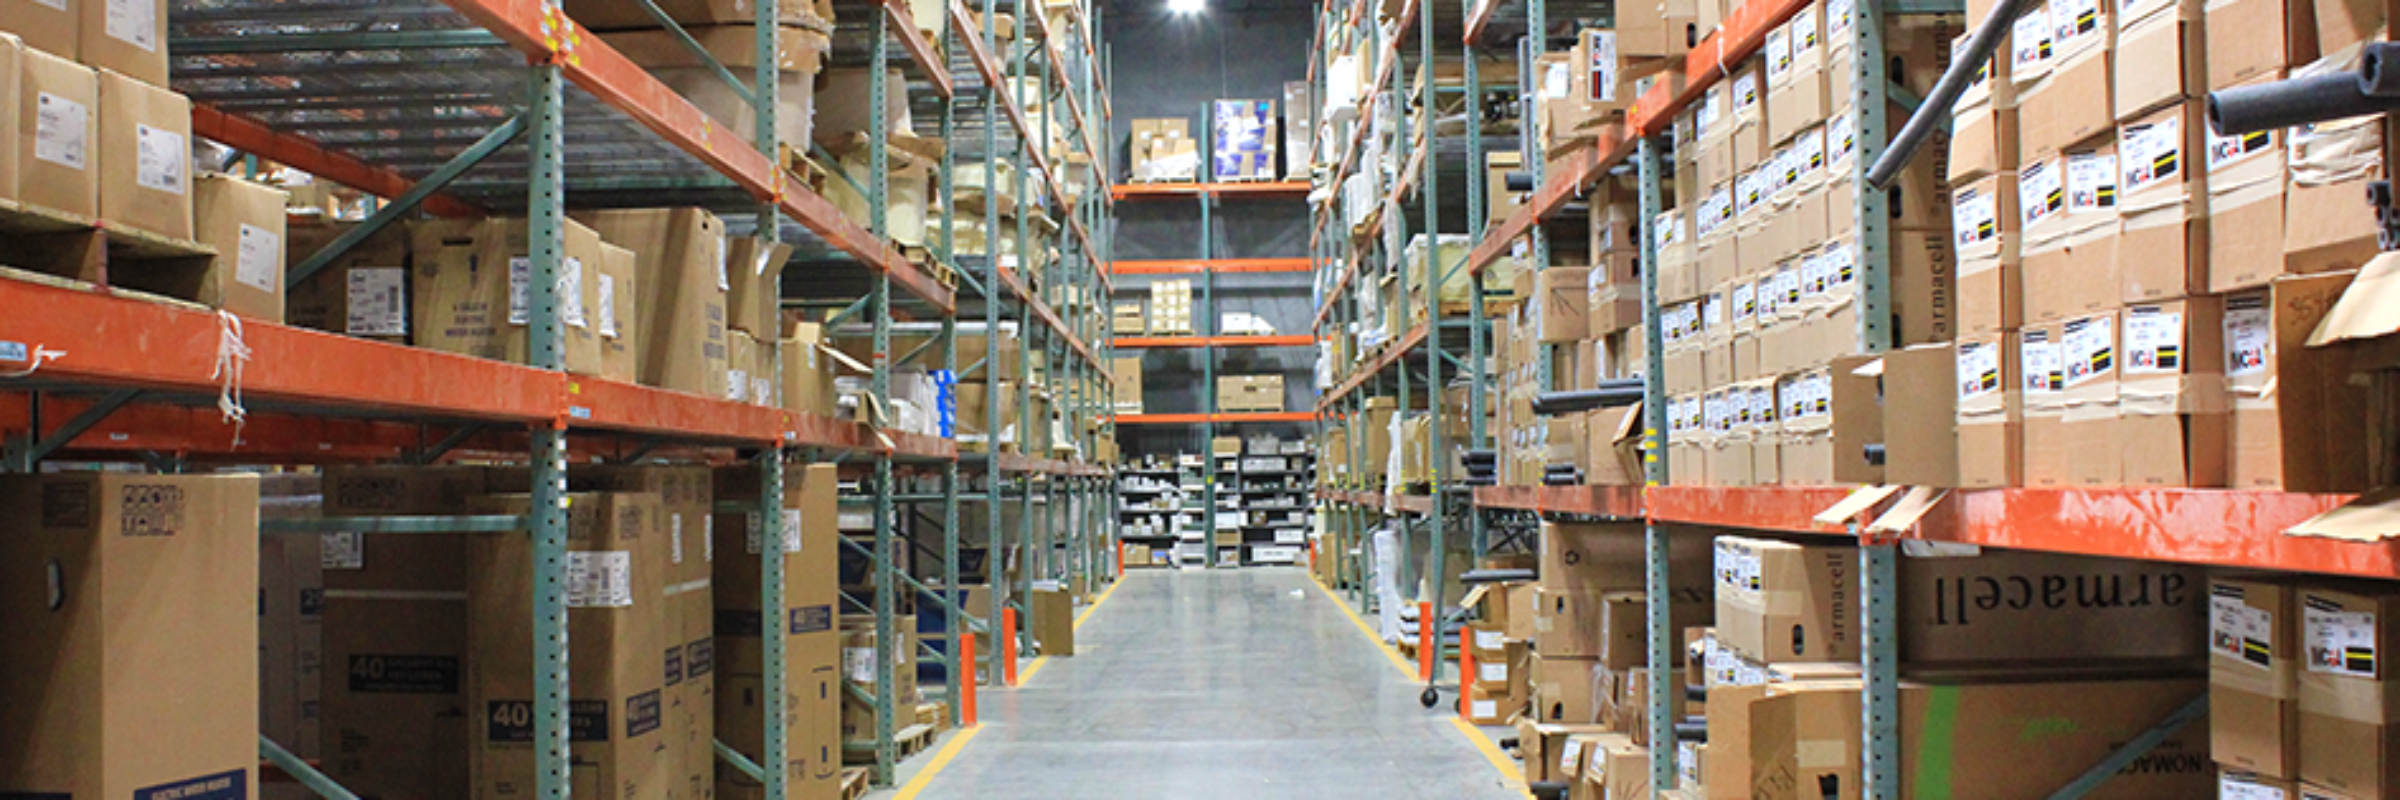 Our warehouse is stocked for your needs